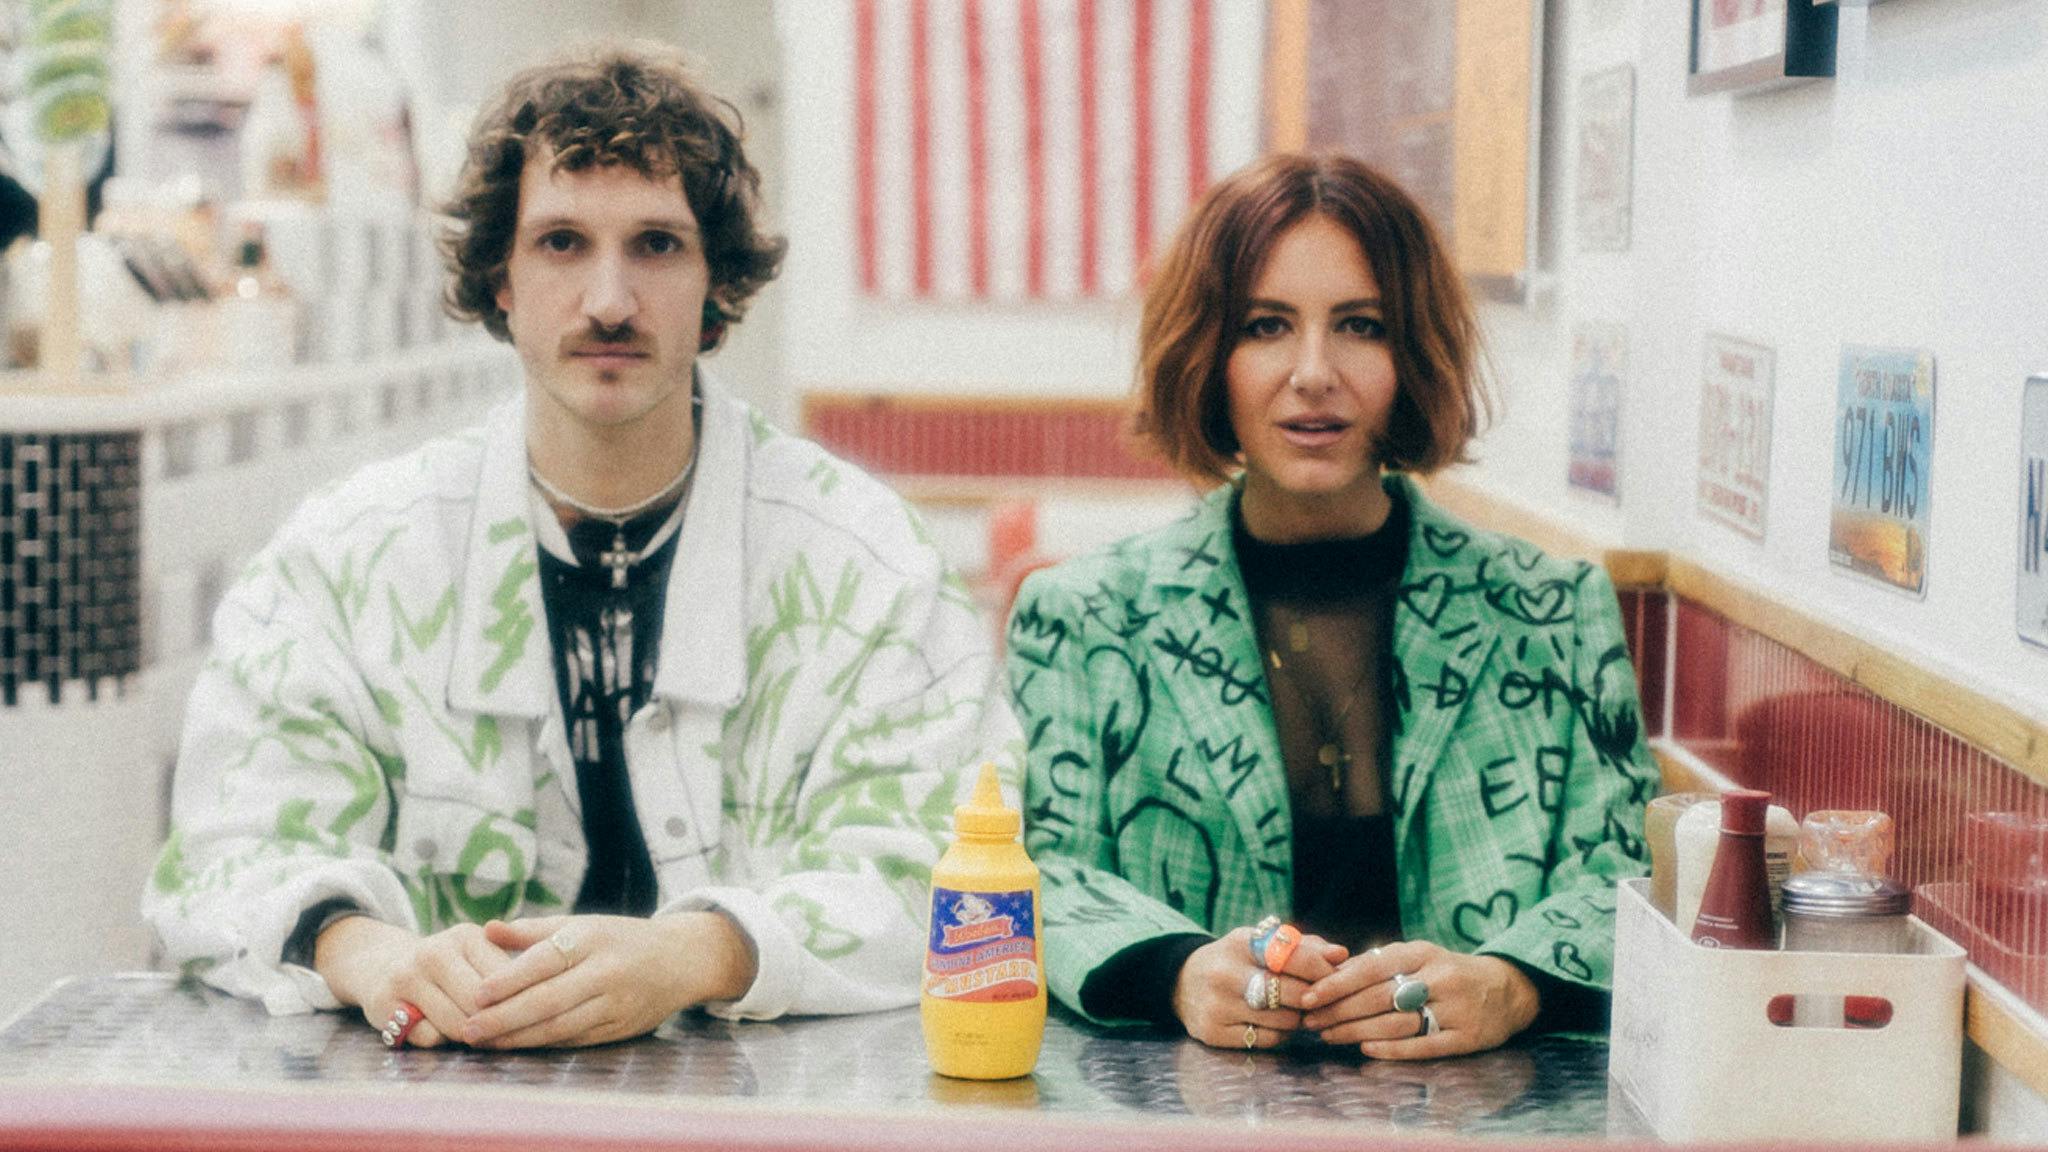 Watch Shelf Lives’ “playful” new video for PVC Real Estate